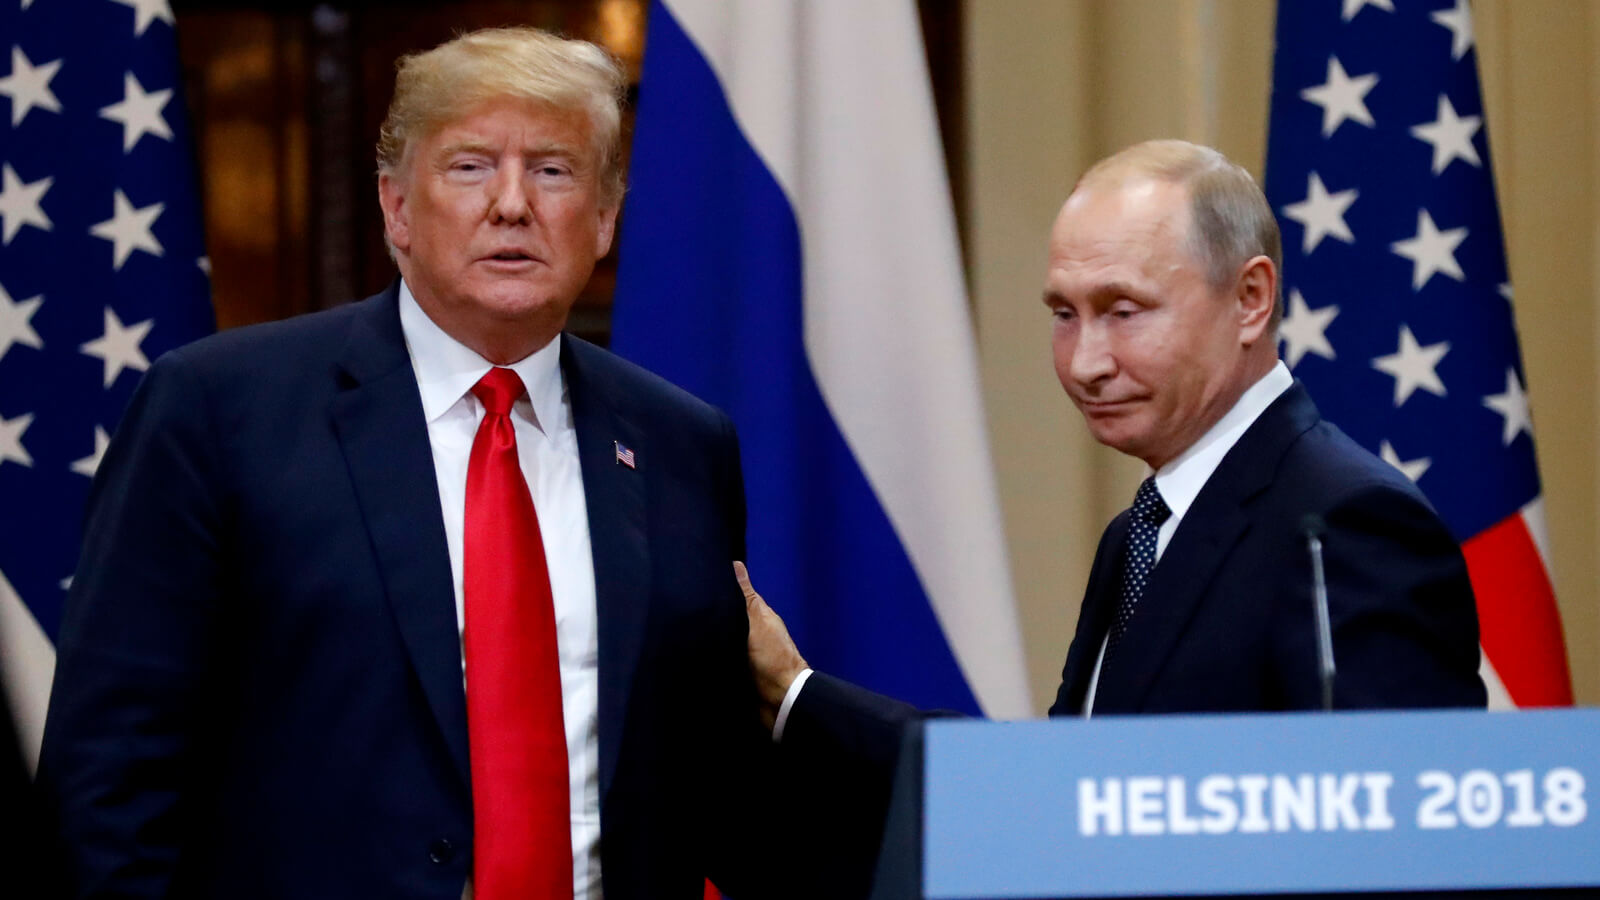 U.S. President Donald Trump, left, and Russian President Vladimir Putin leave after a press conference after their meeting at the Presidential Palace in Helsinki, Finland, July 16, 2018. Alexander Zemlianichenko | AP